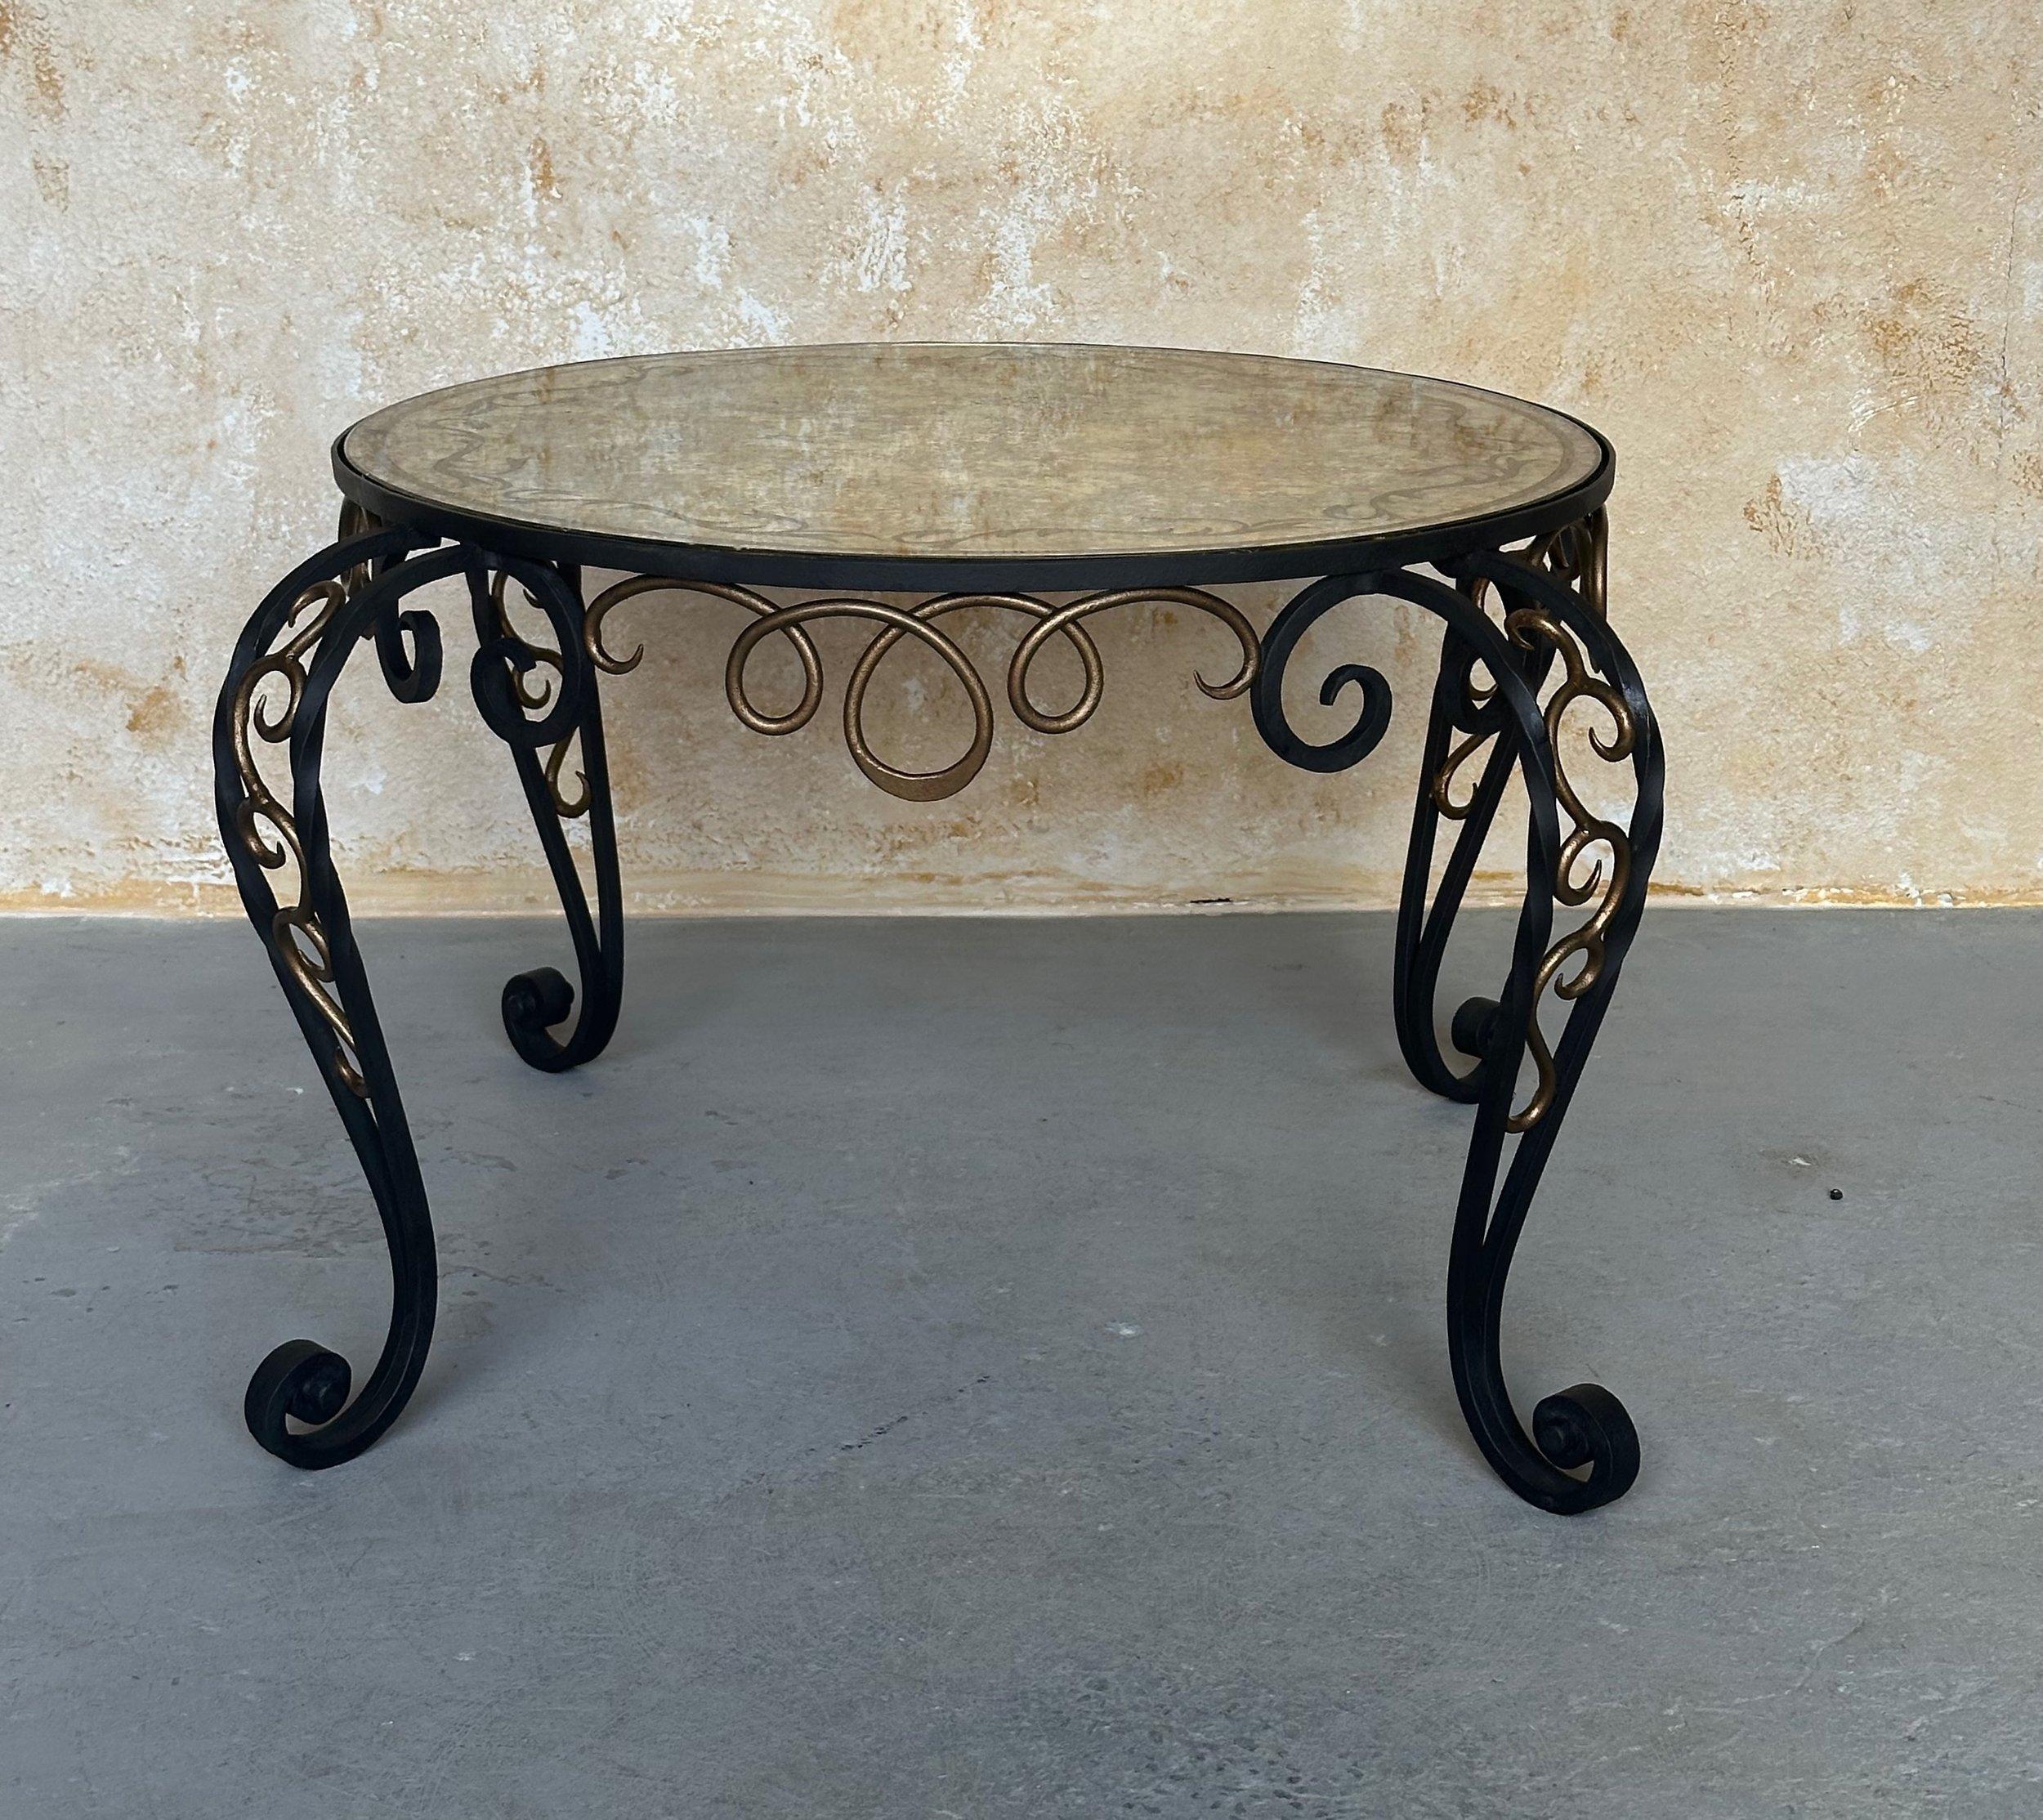 An interesting French 1940s iron coffee table with a decorative reverse painted mirror top. The elegantly scrolled base has recently been refinished in a matte black paint with hand-applied gold accents that contrast beautifully with the reverse